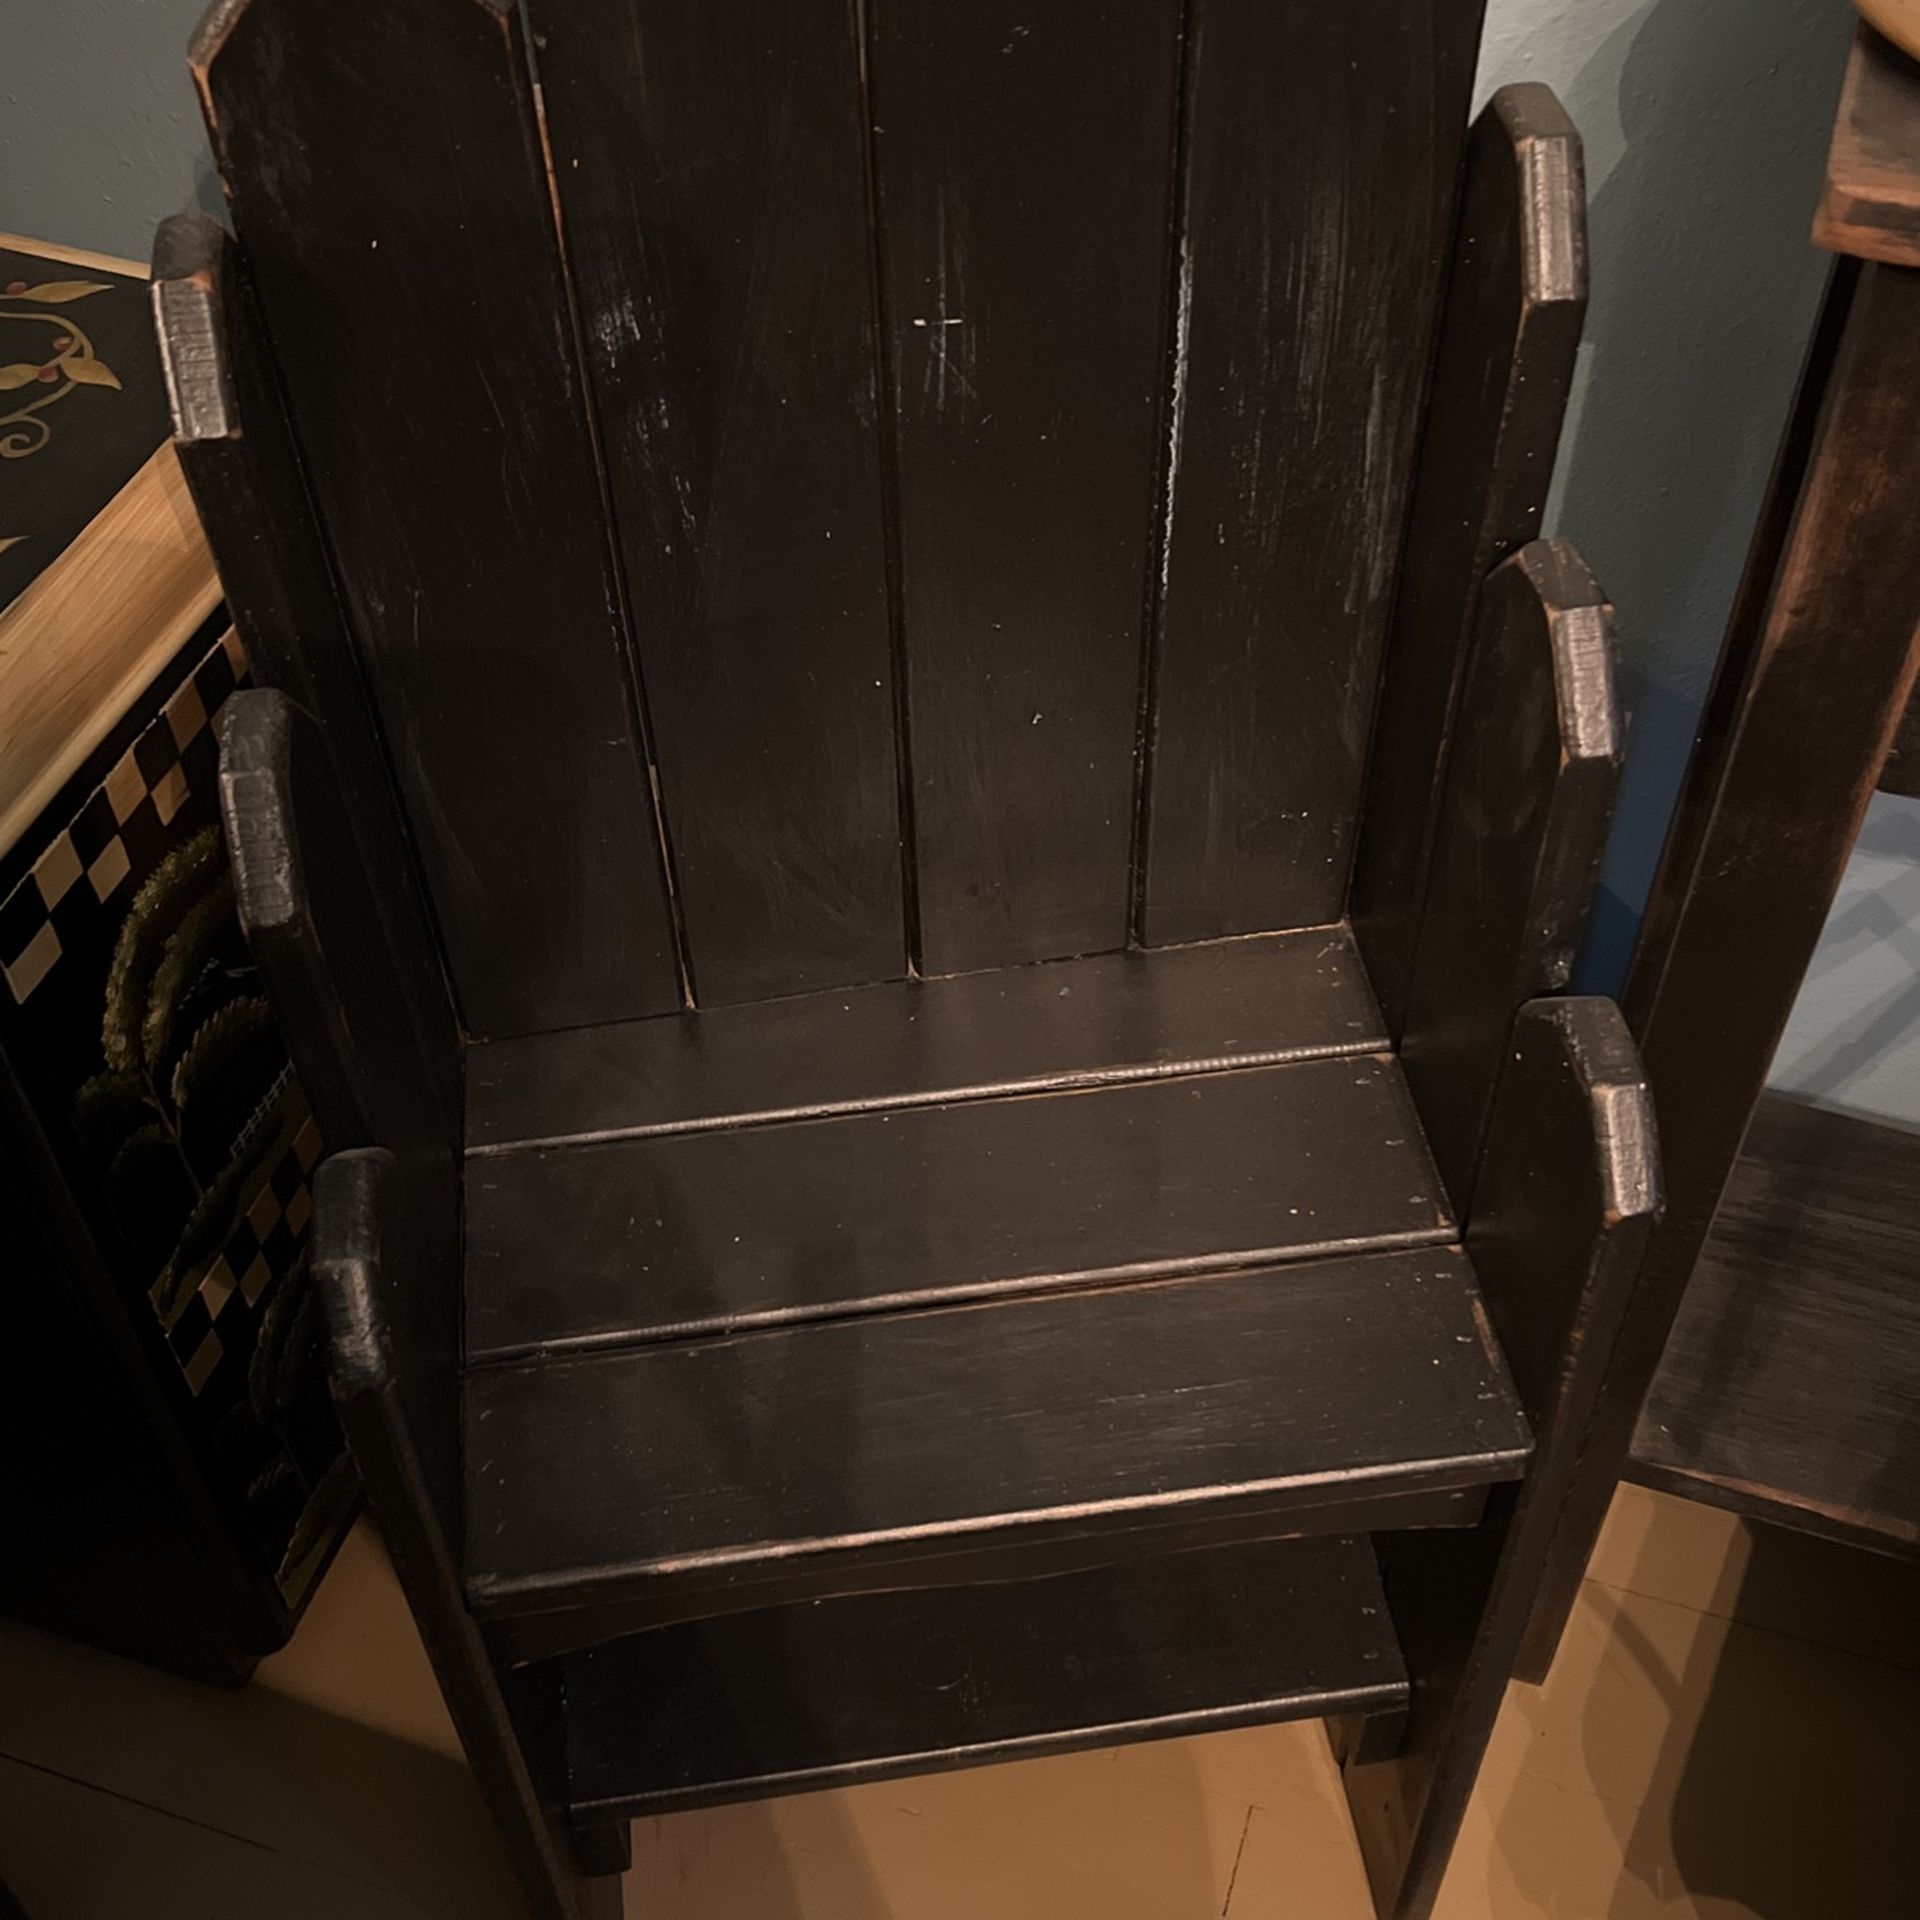 Black Wooden Chair With Shelf Underneath 